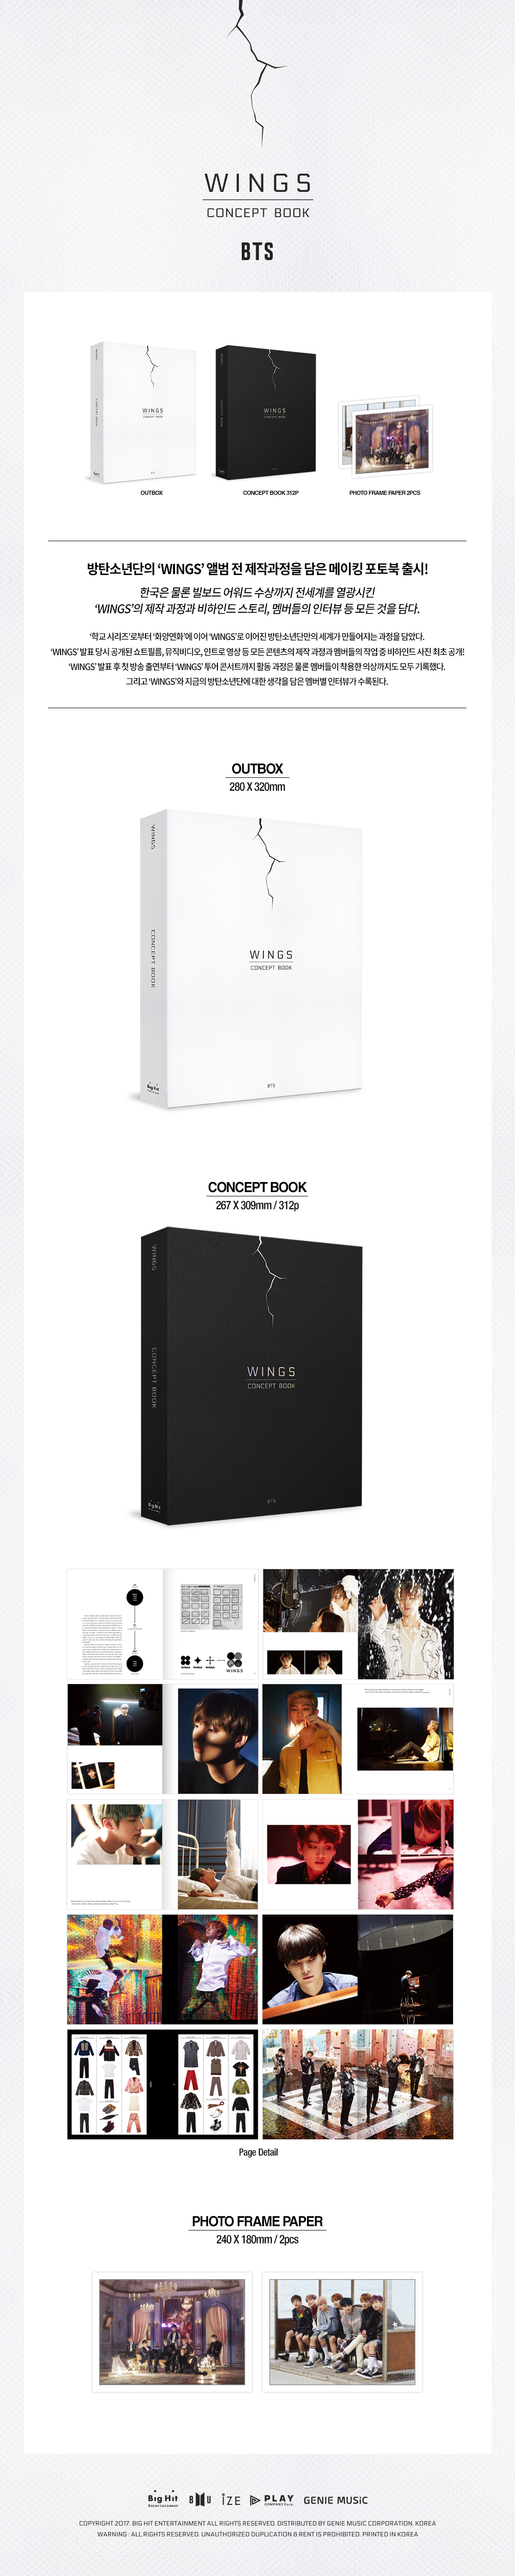 INFO] BTS WINGS CONCEPT BOOK [170622] |